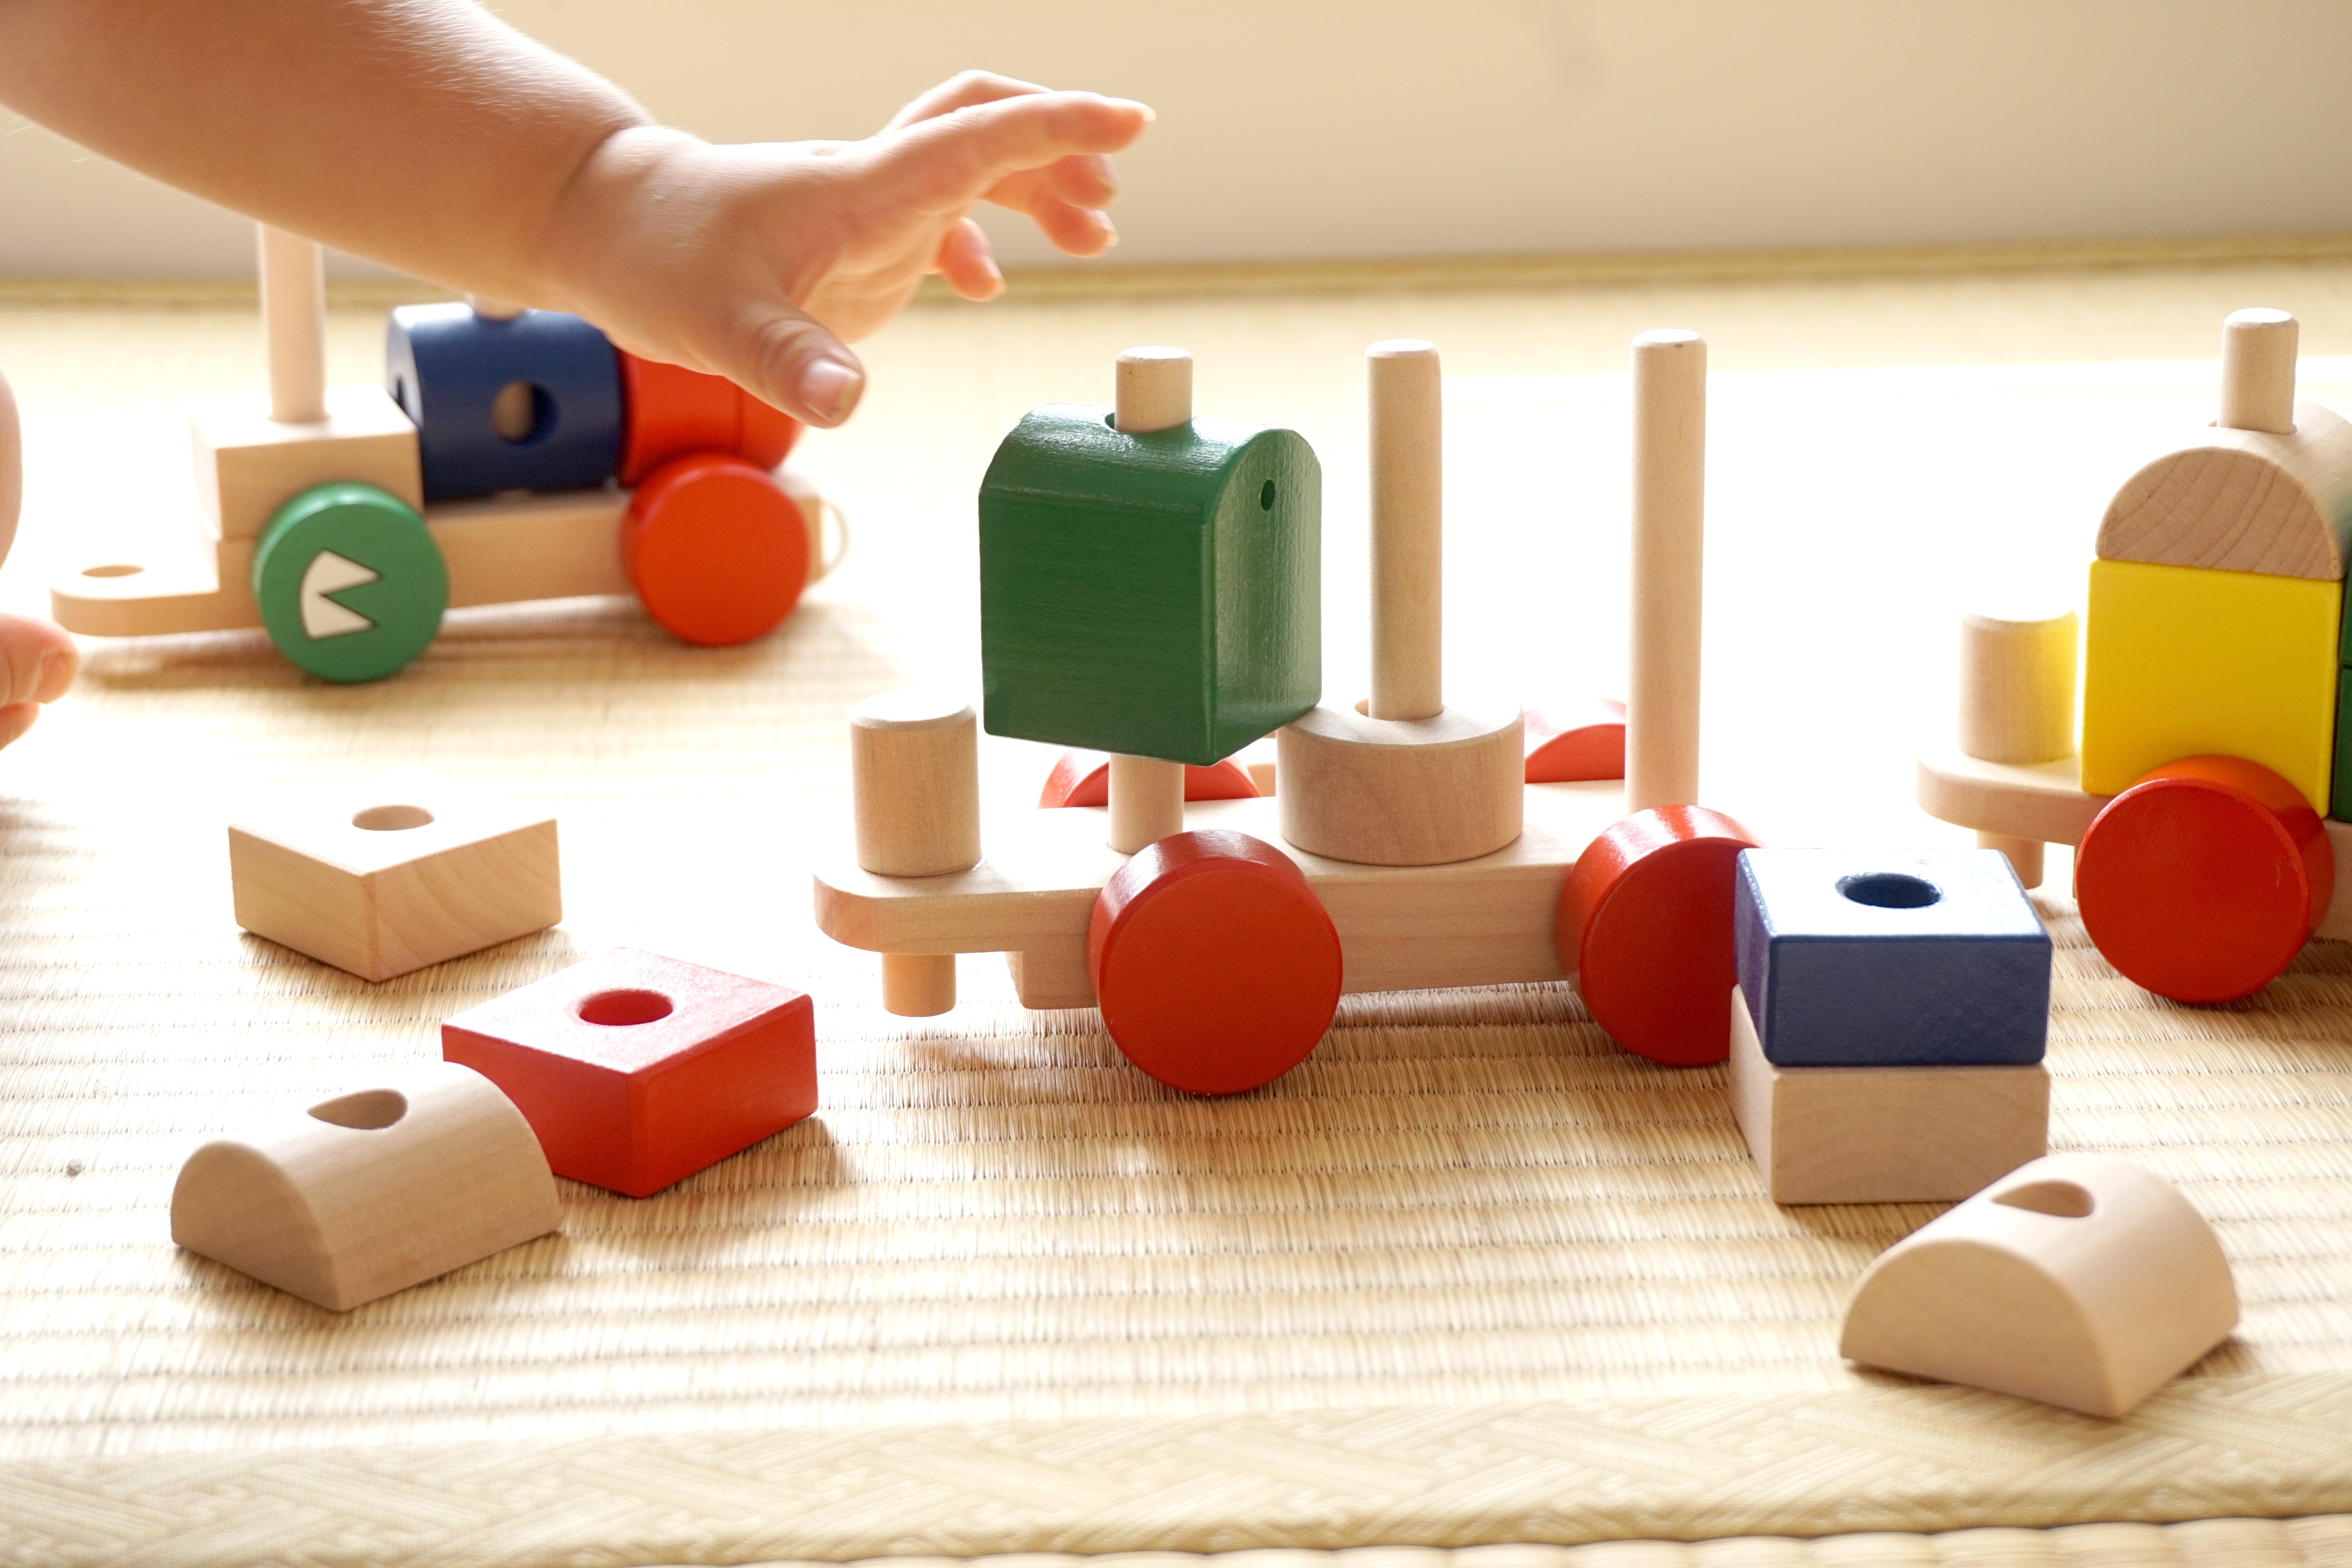 A child's hand reaches for a bright green wooden block surrounded by a colorful wooden train set.